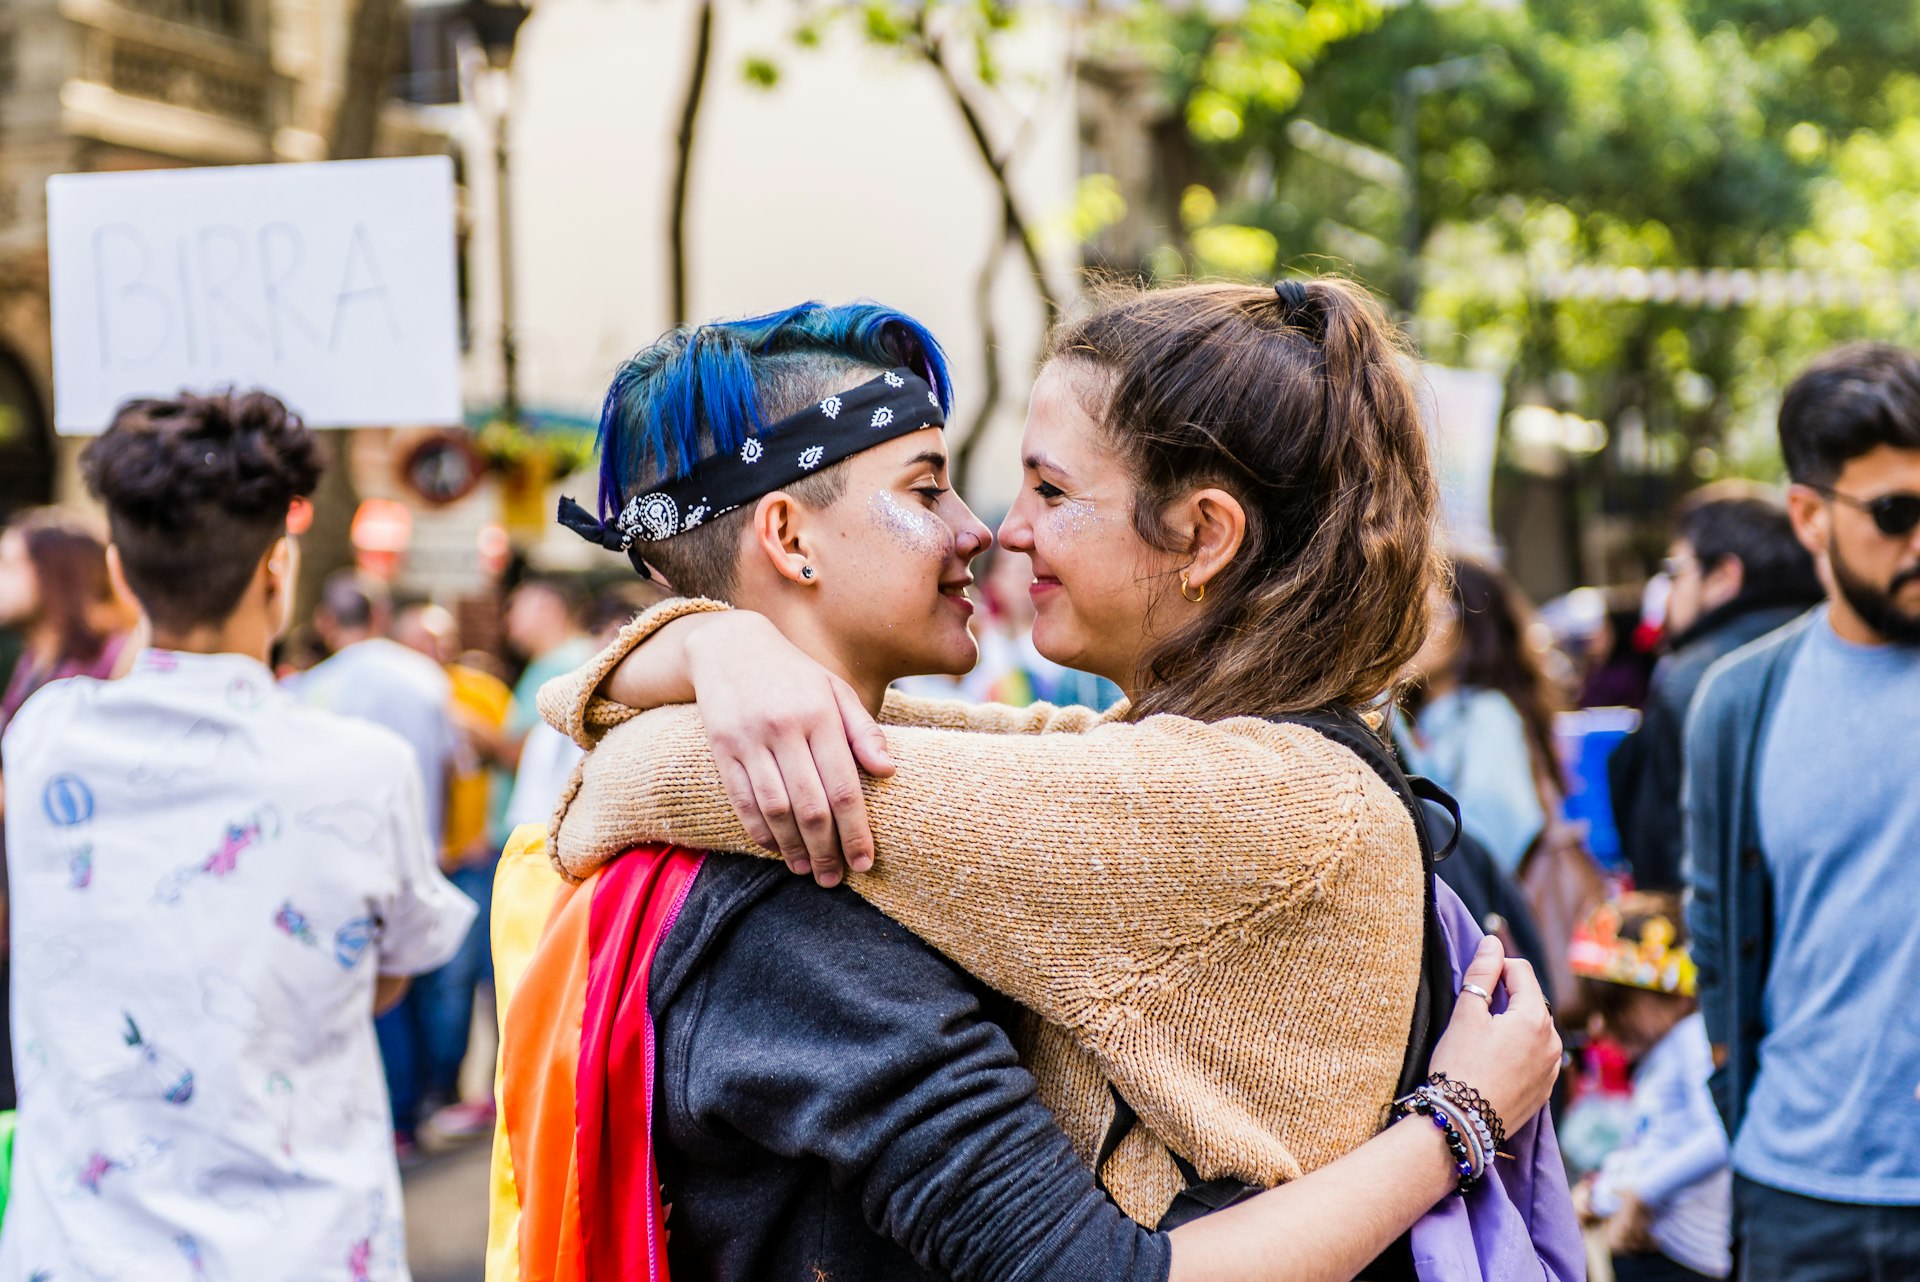 Two women are hugging and smiling at each other during a Pride event in Buenos Aires